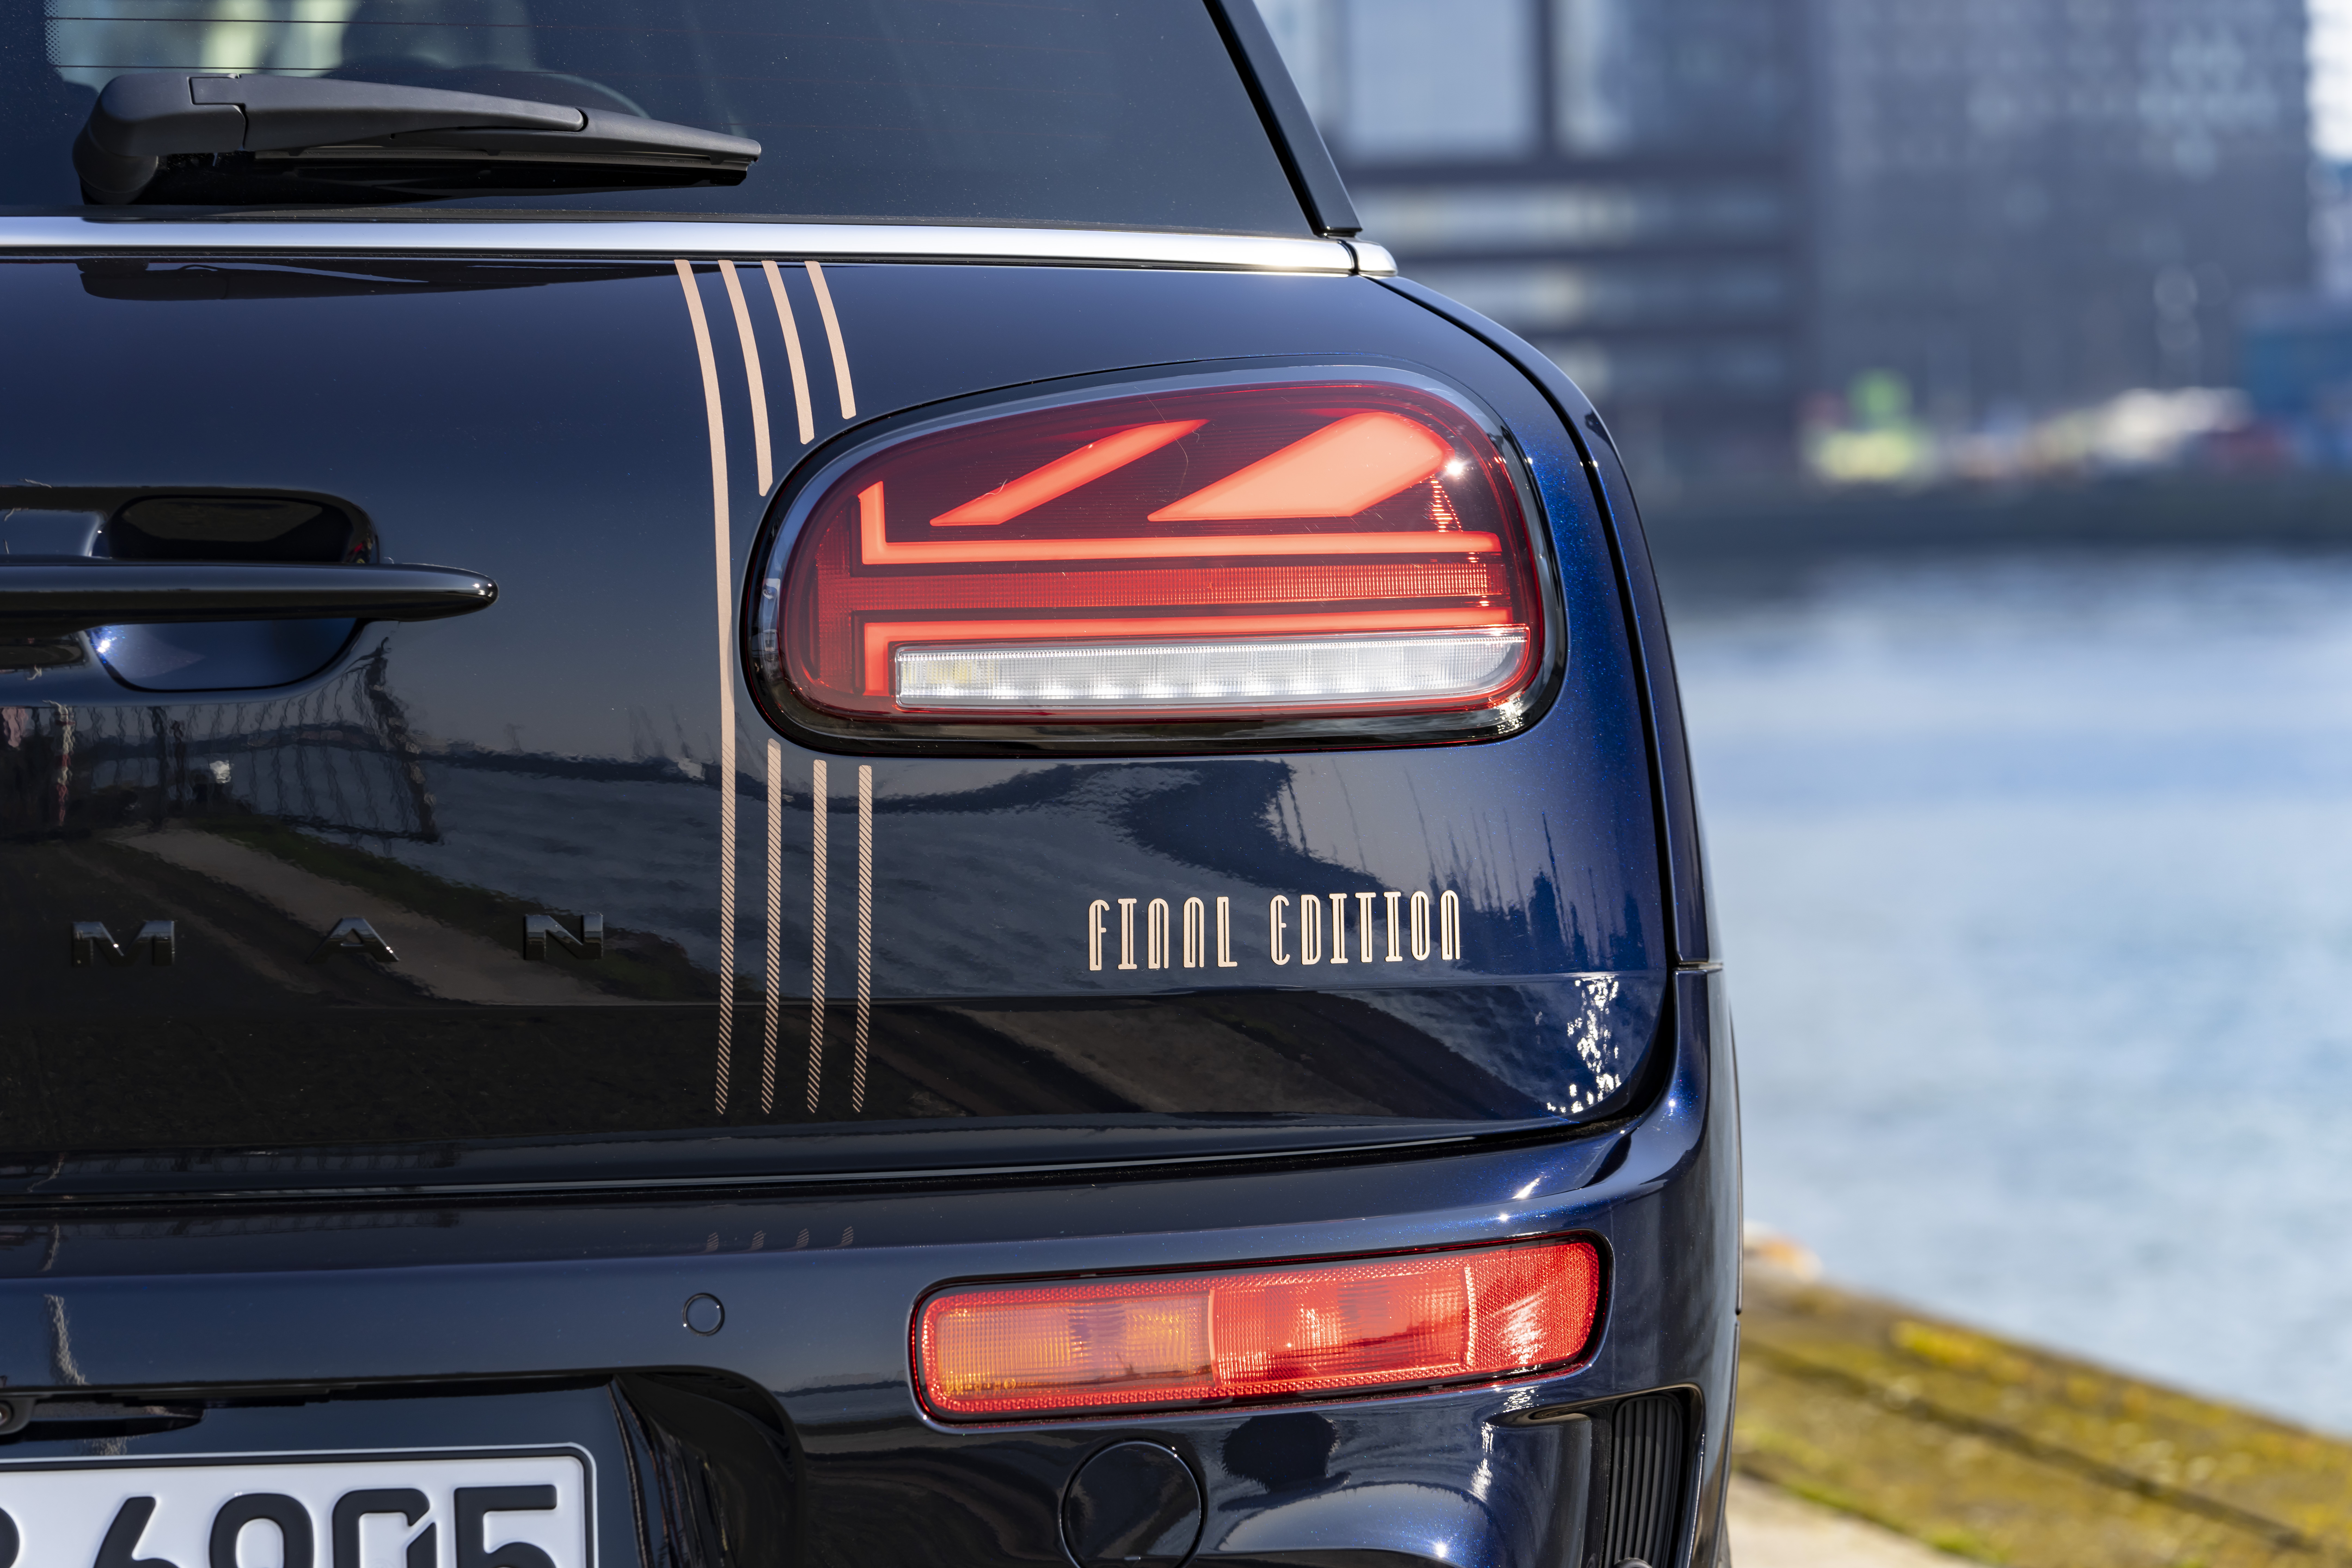 mini launches the limited-edition mini clubman final edition in singapore